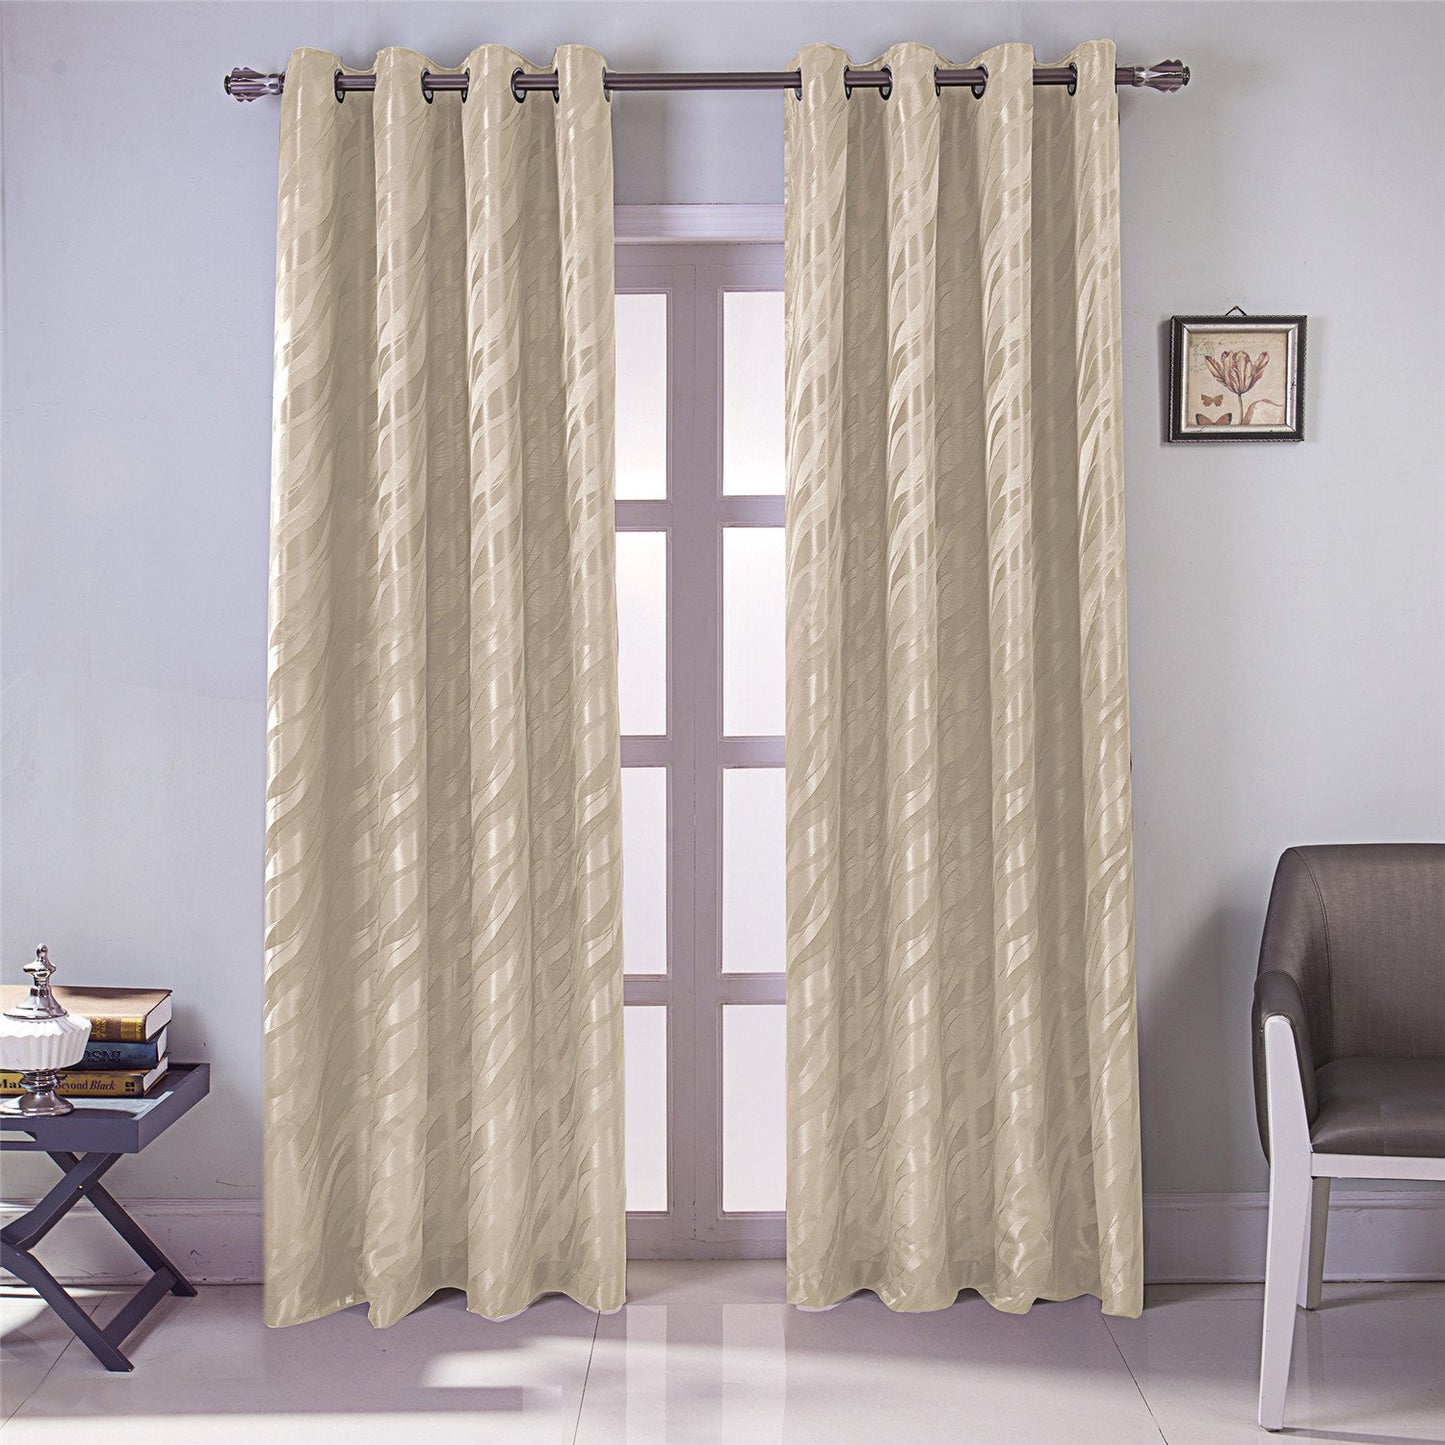 Gyrohomestore Cheap Solid Blackout Thermal Indoor/Outdoor Grommet Curtain